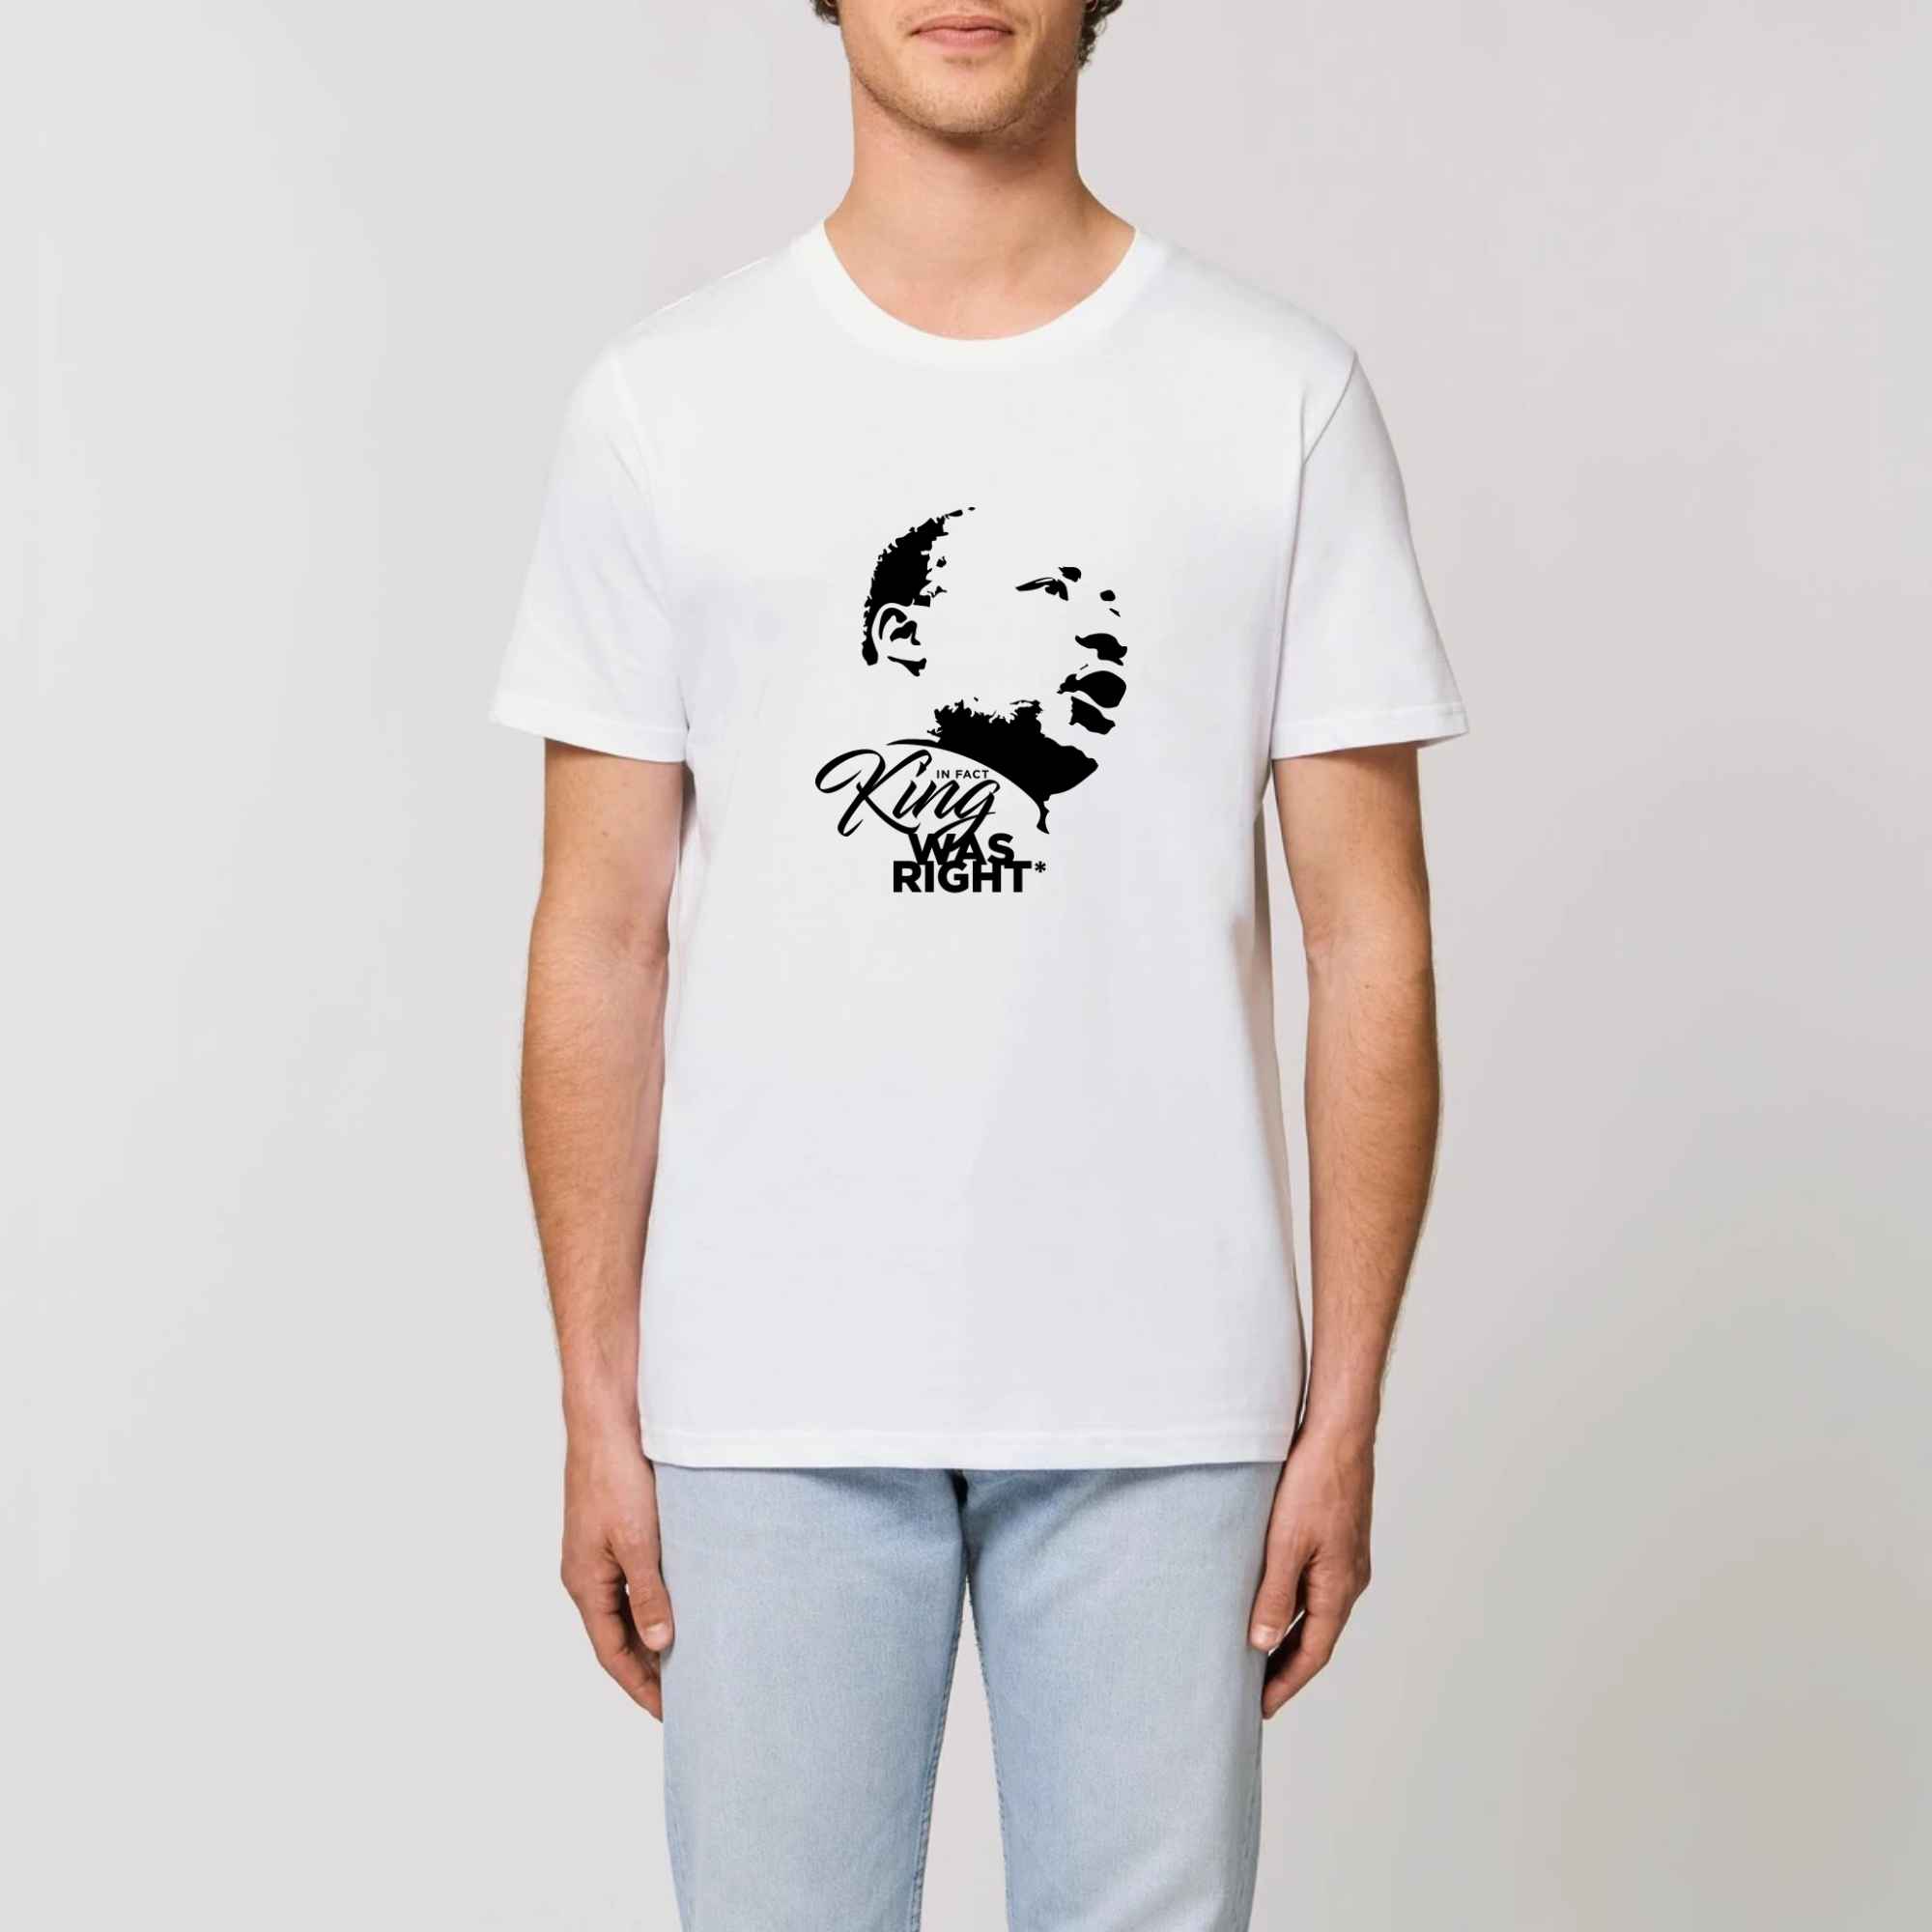 T-shirt unisexe col rond blanc et noir KING WAS RIGHT - Collection martin Luther King porté en situation